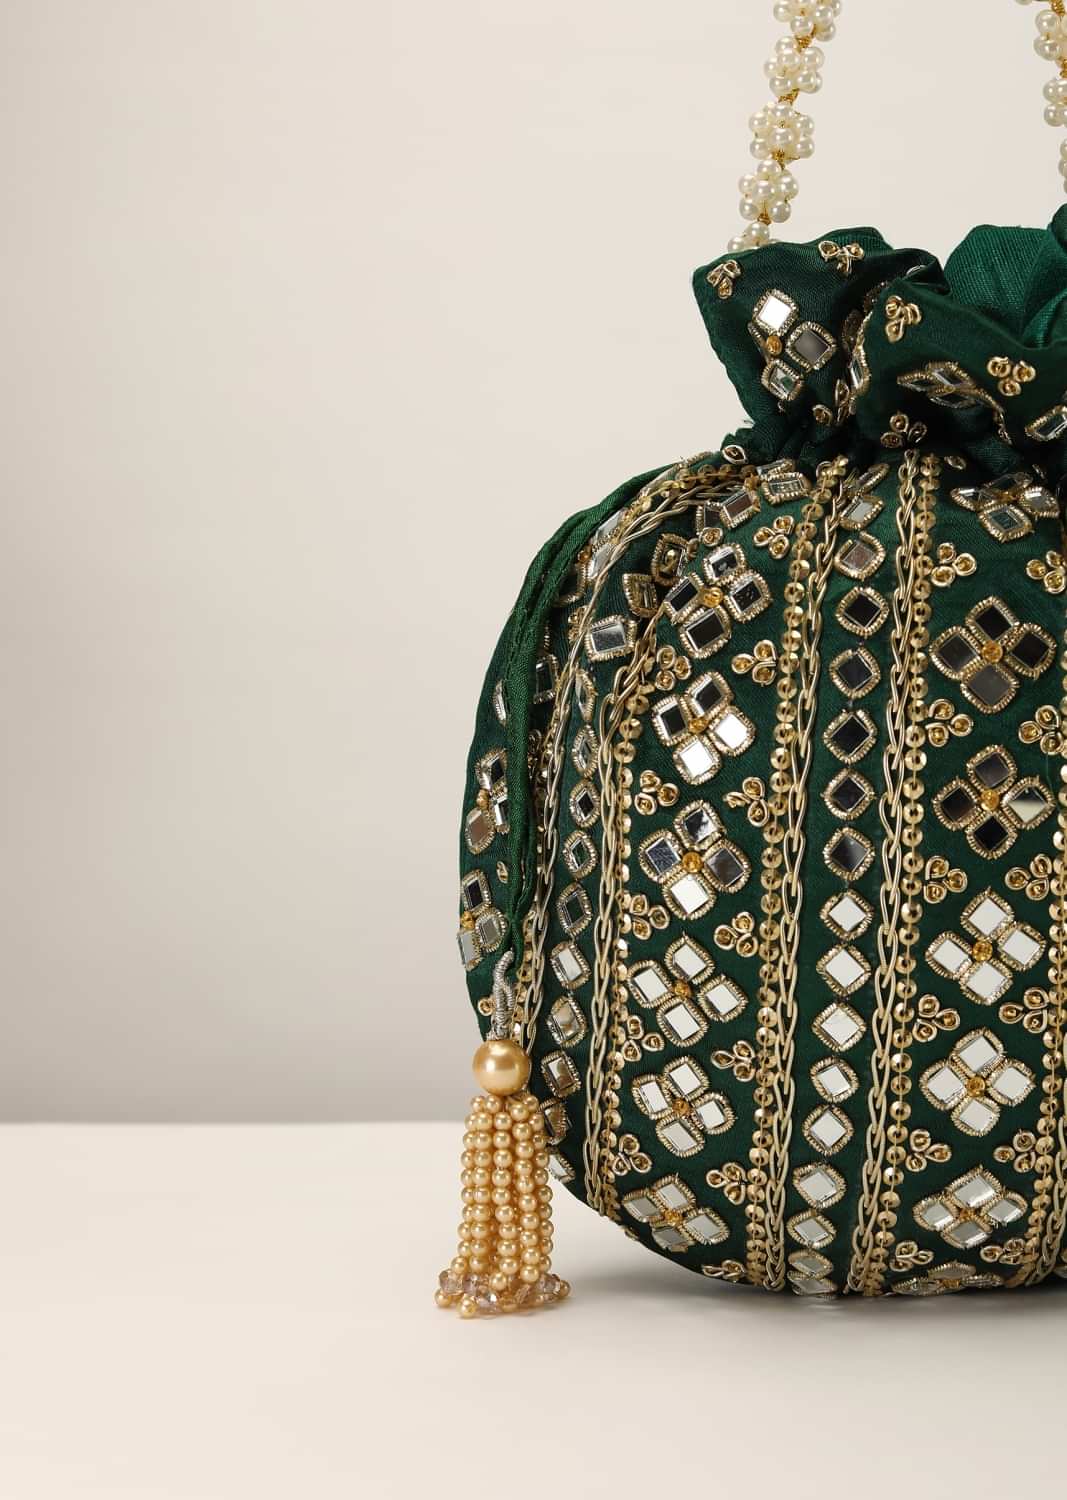 Bottle Green Potli In Satin With Hand Embroidery Detailing Using Mirror And Zardosi In Geometric Design